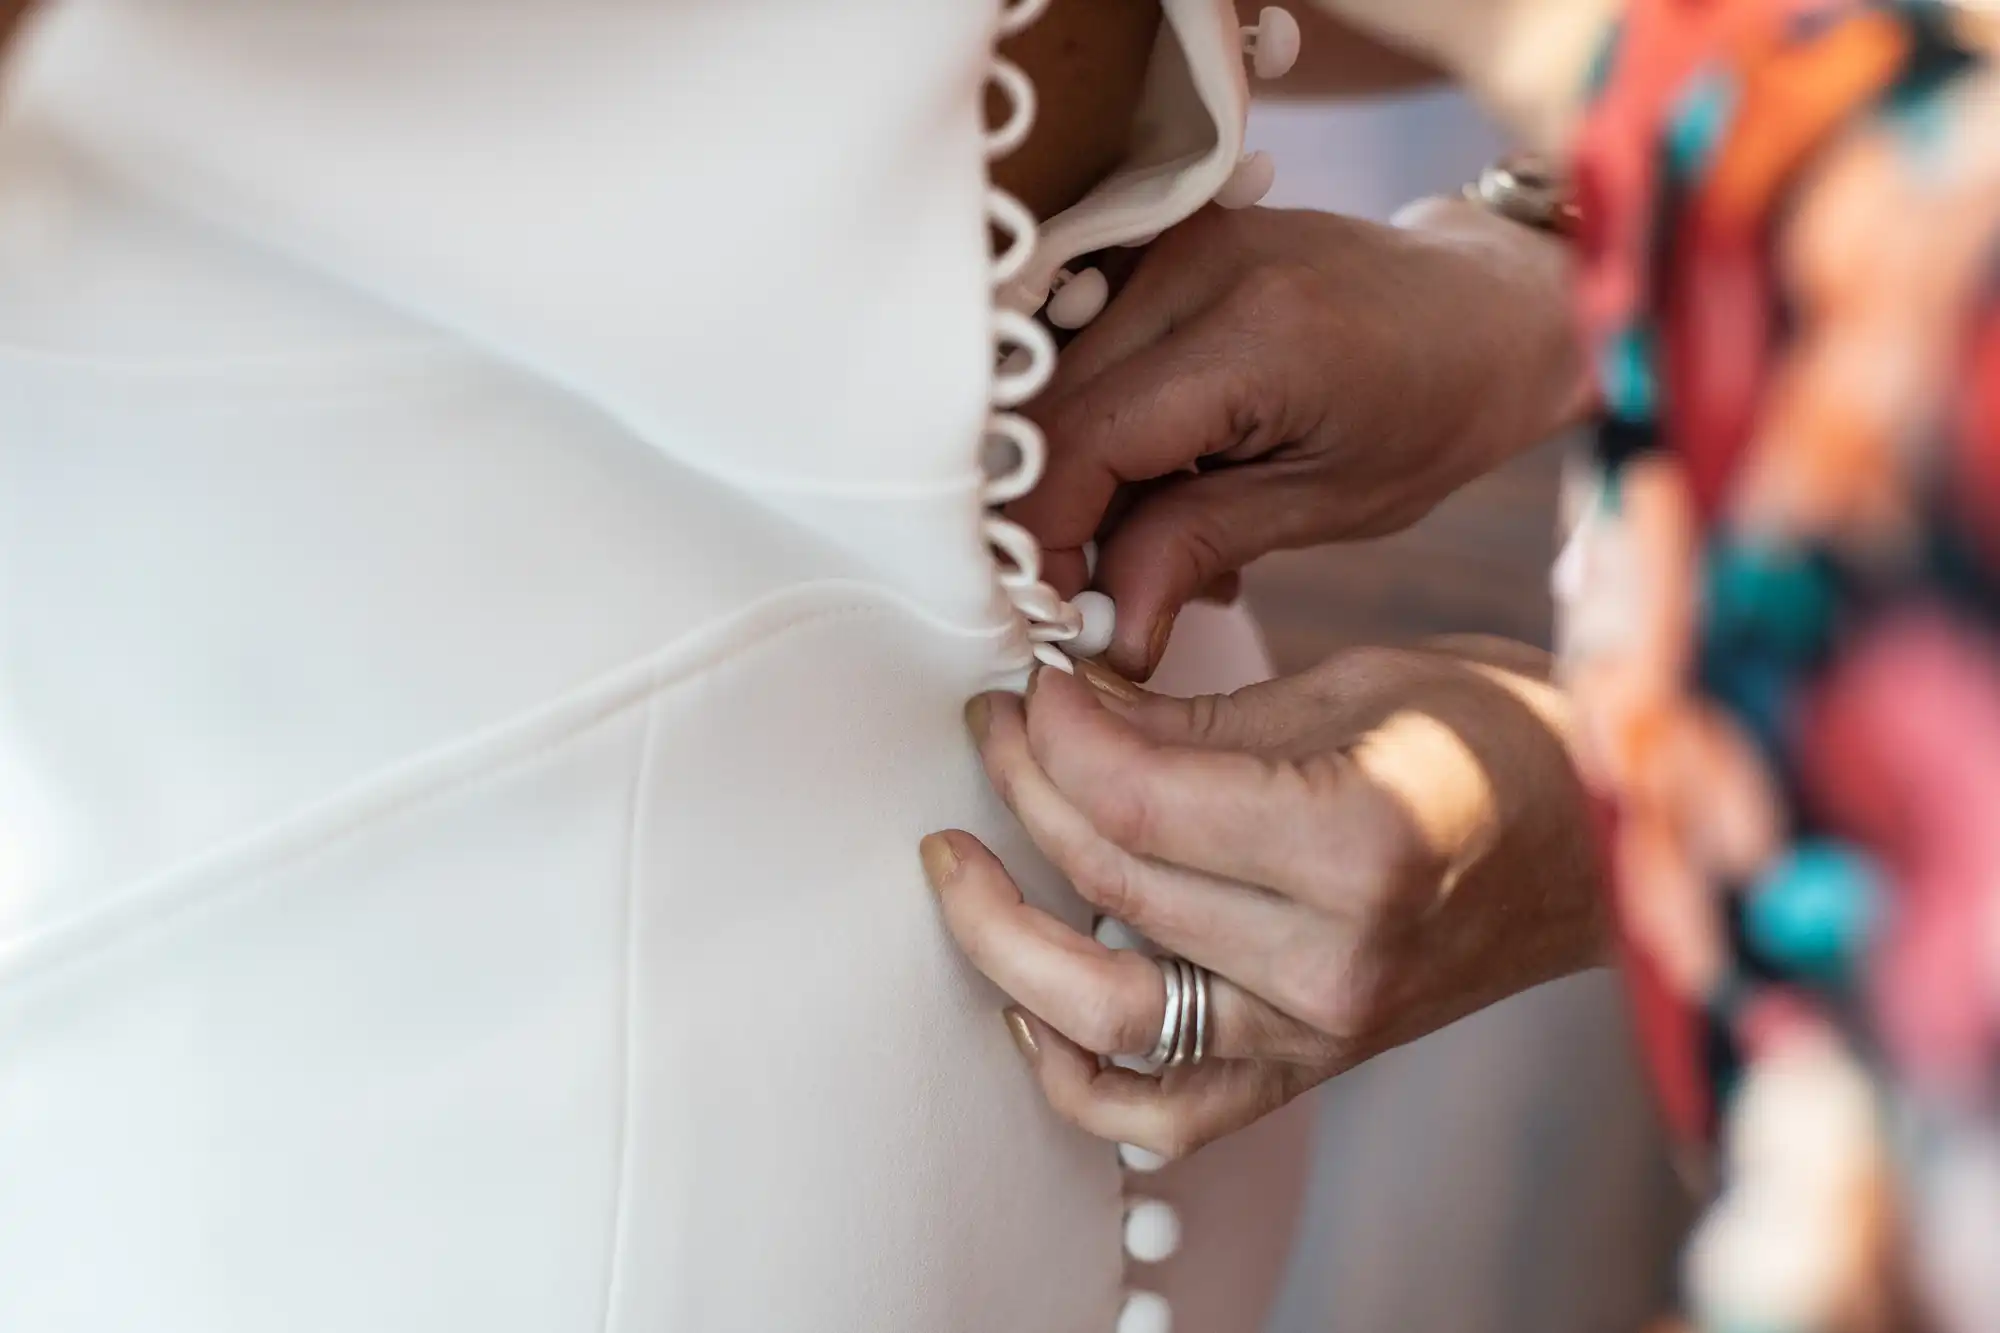 A close-up of a person's hands fastening the loop buttons on the back of a white wedding dress.